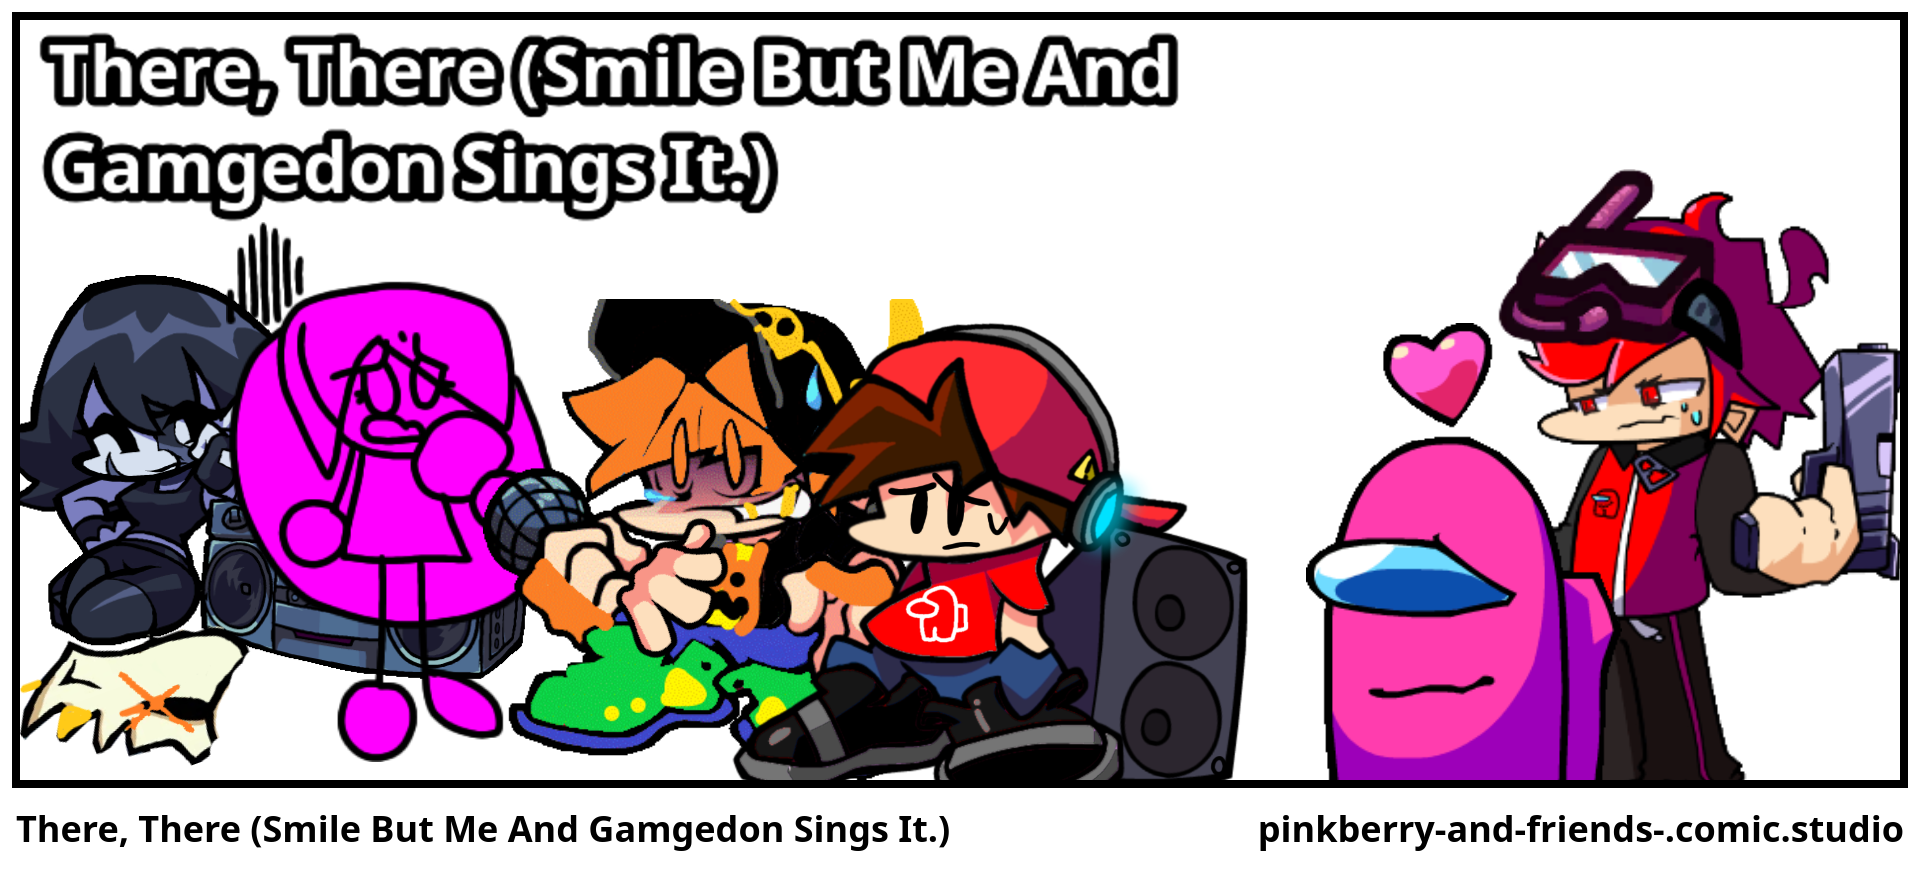 There, There (Smile But Me And Gamgedon Sings It.)